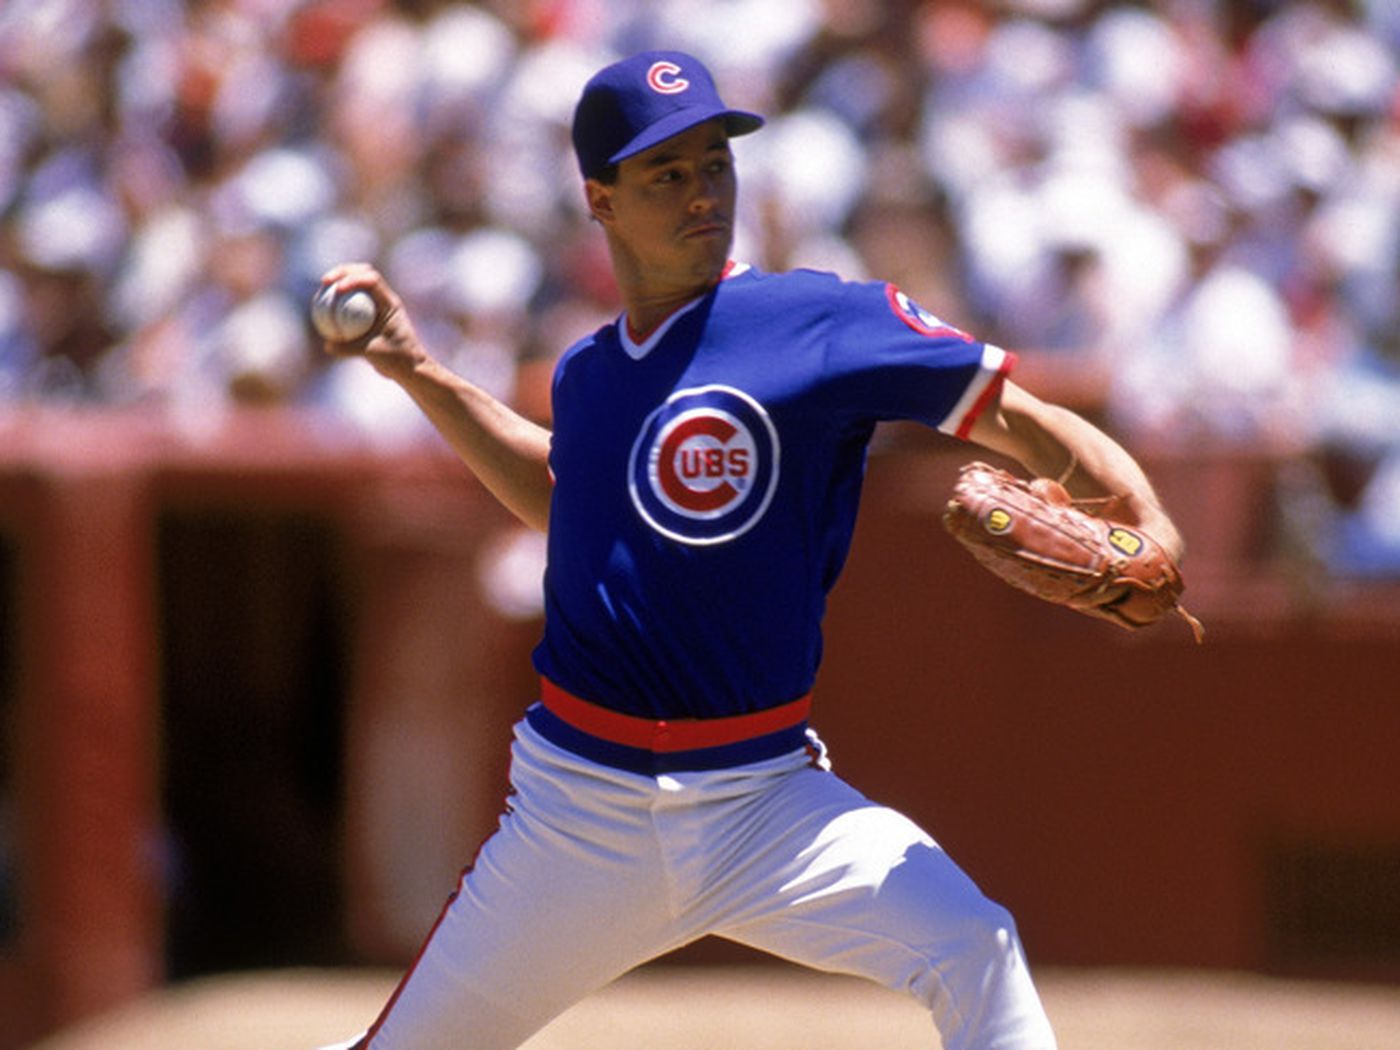 Hall of Famer Greg Maddux visits Albuquerque to promote book